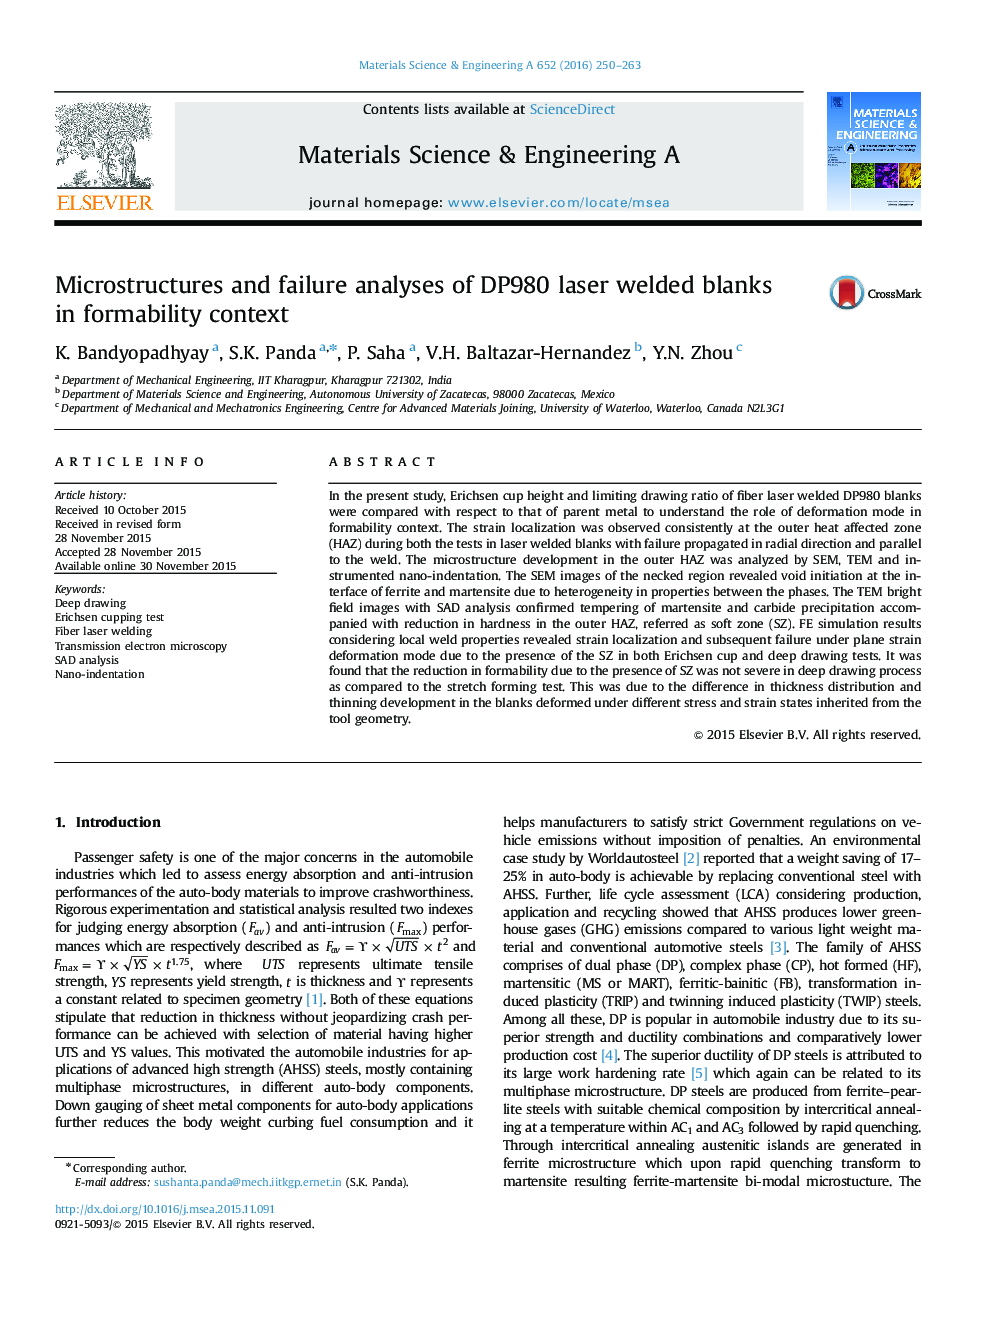 Microstructures and failure analyses of DP980 laser welded blanks in formability context